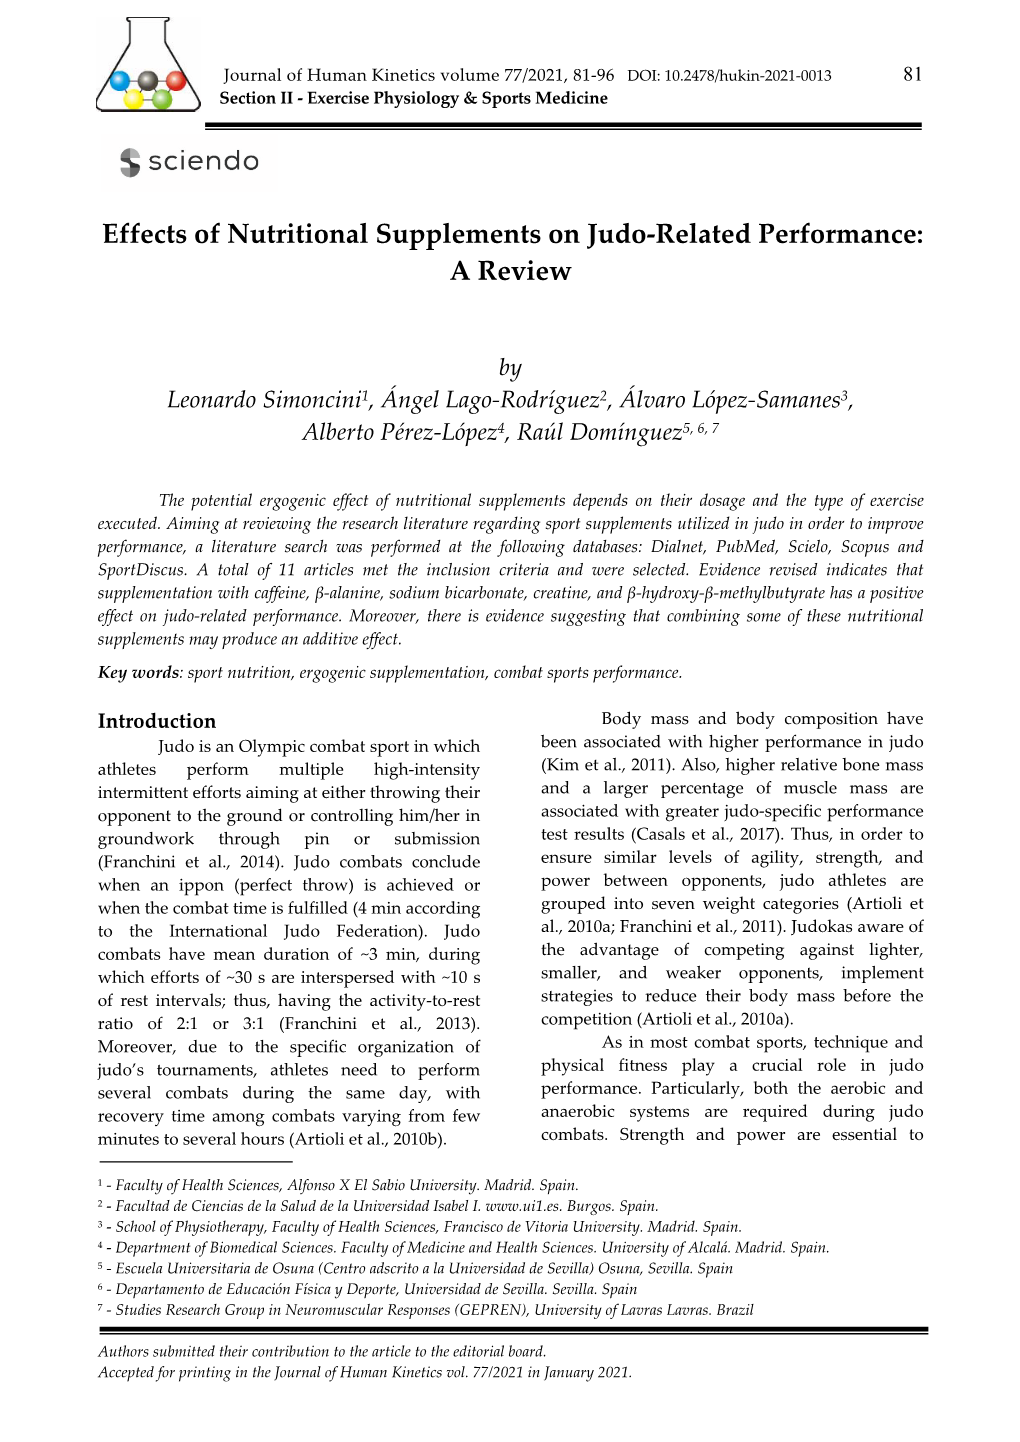 Effects of Nutritional Supplements on Judo-Related Performance: a Review